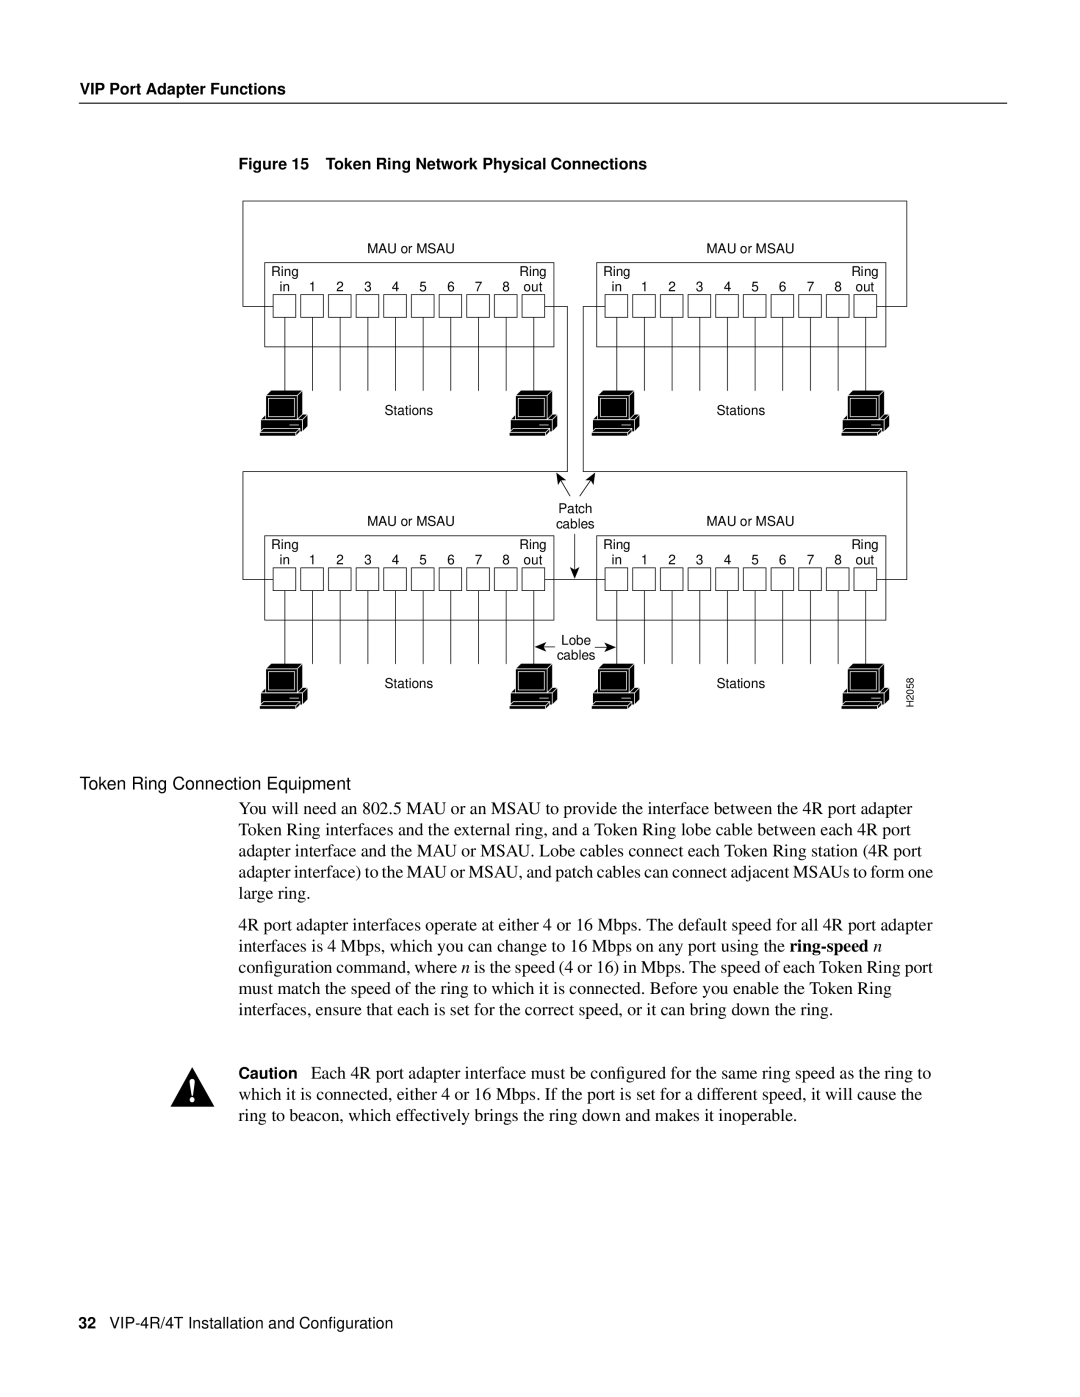 Cisco Systems manual Token Ring Connection Equipment, VIP-4R/4T Installation and Conﬁguration 